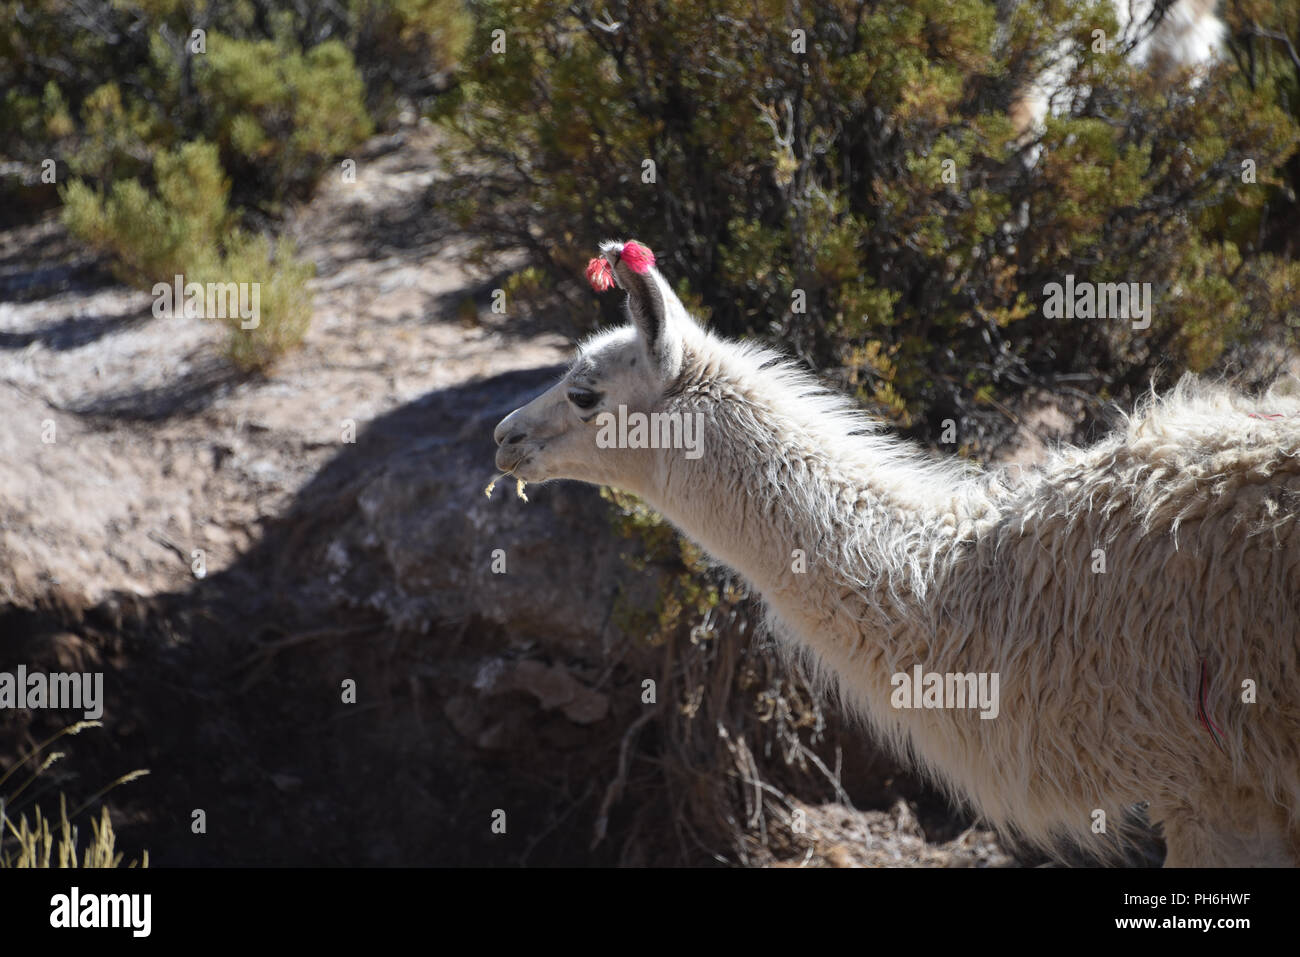 Llamas grazing in the highlands of the Andes Mountains, near Tupiza, Bolivia, South America Stock Photo